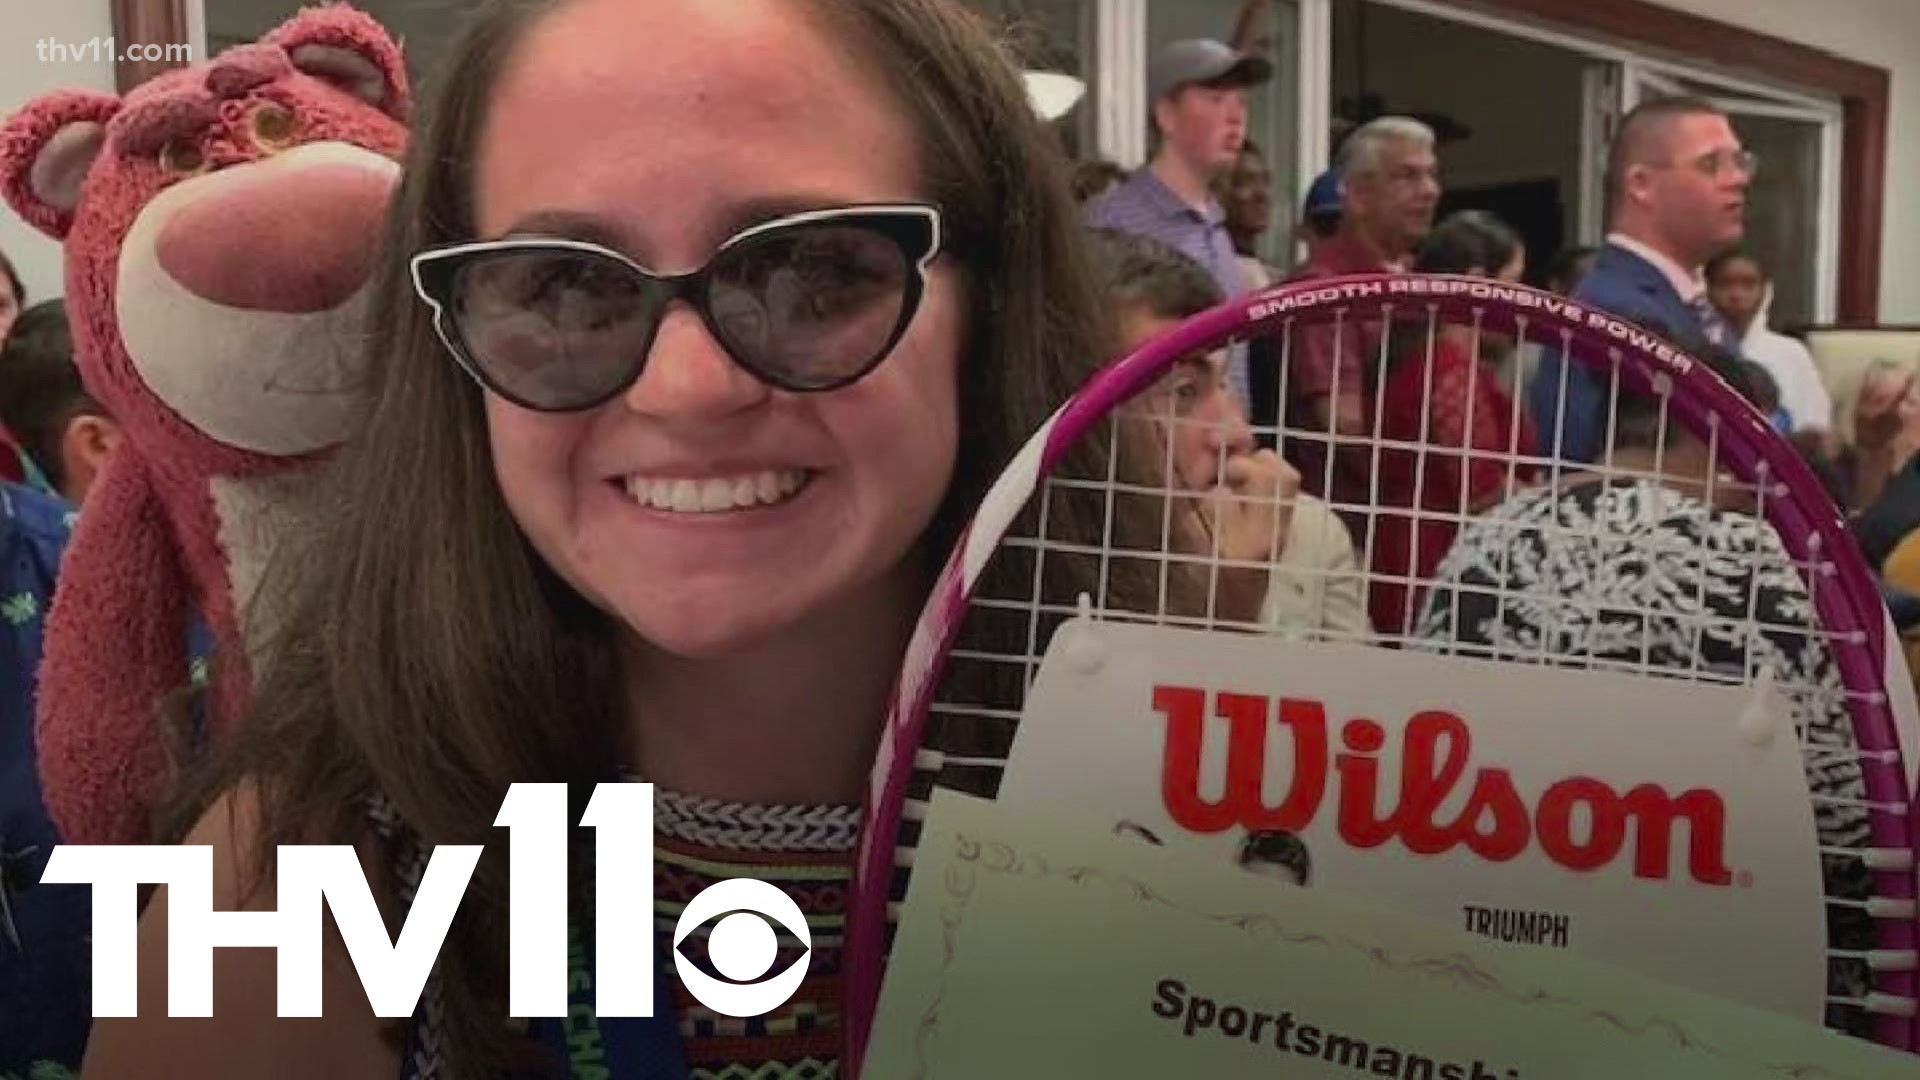 23-year-old Rachel Sweatt is a beast on the tennis court, and her success is made that much sweeter by the challenges she's faced to get there.